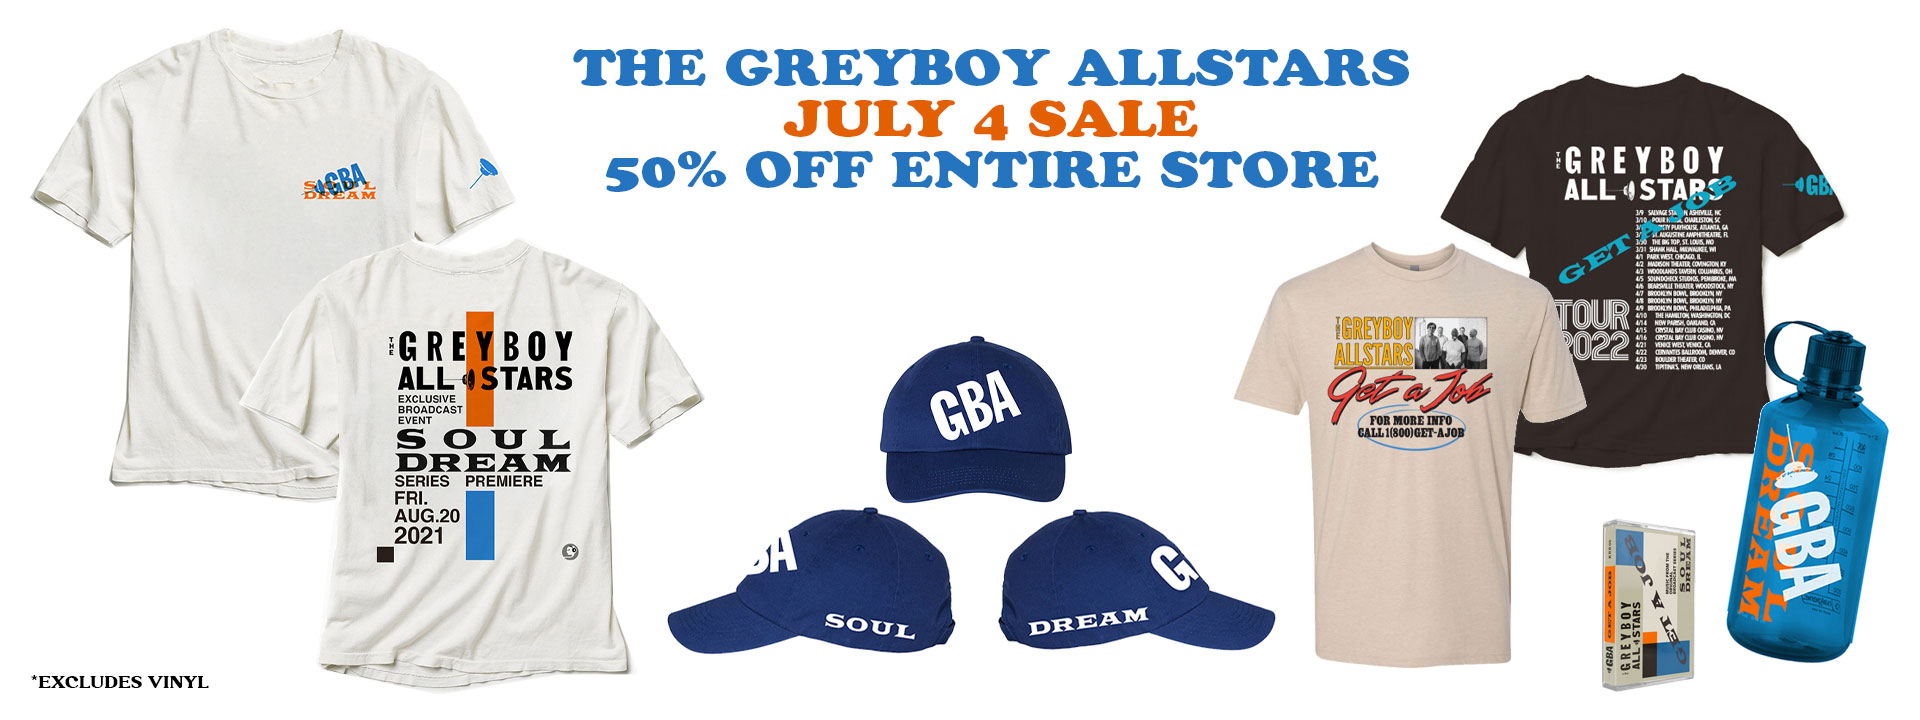 The Greyboy Allstars 4th of July Sale